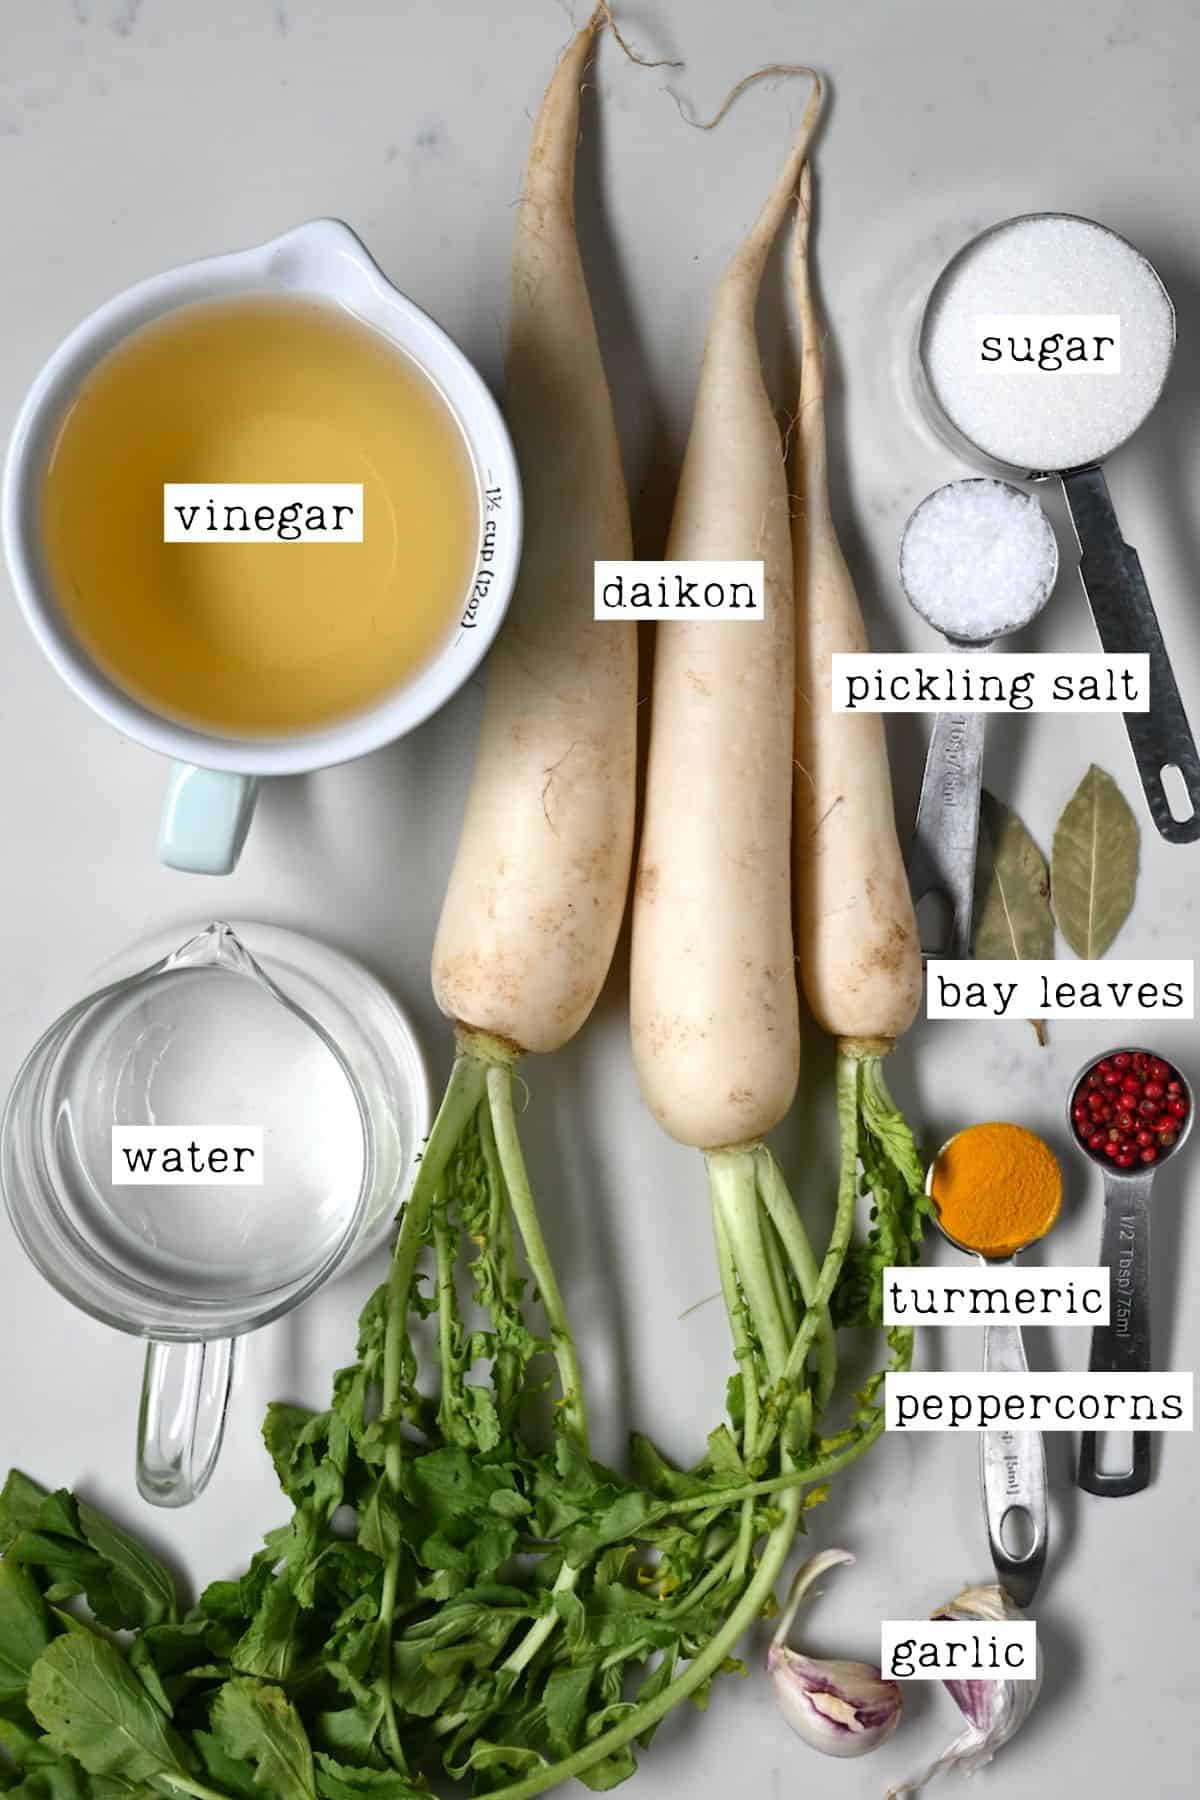 Ingredients for pickled daikon